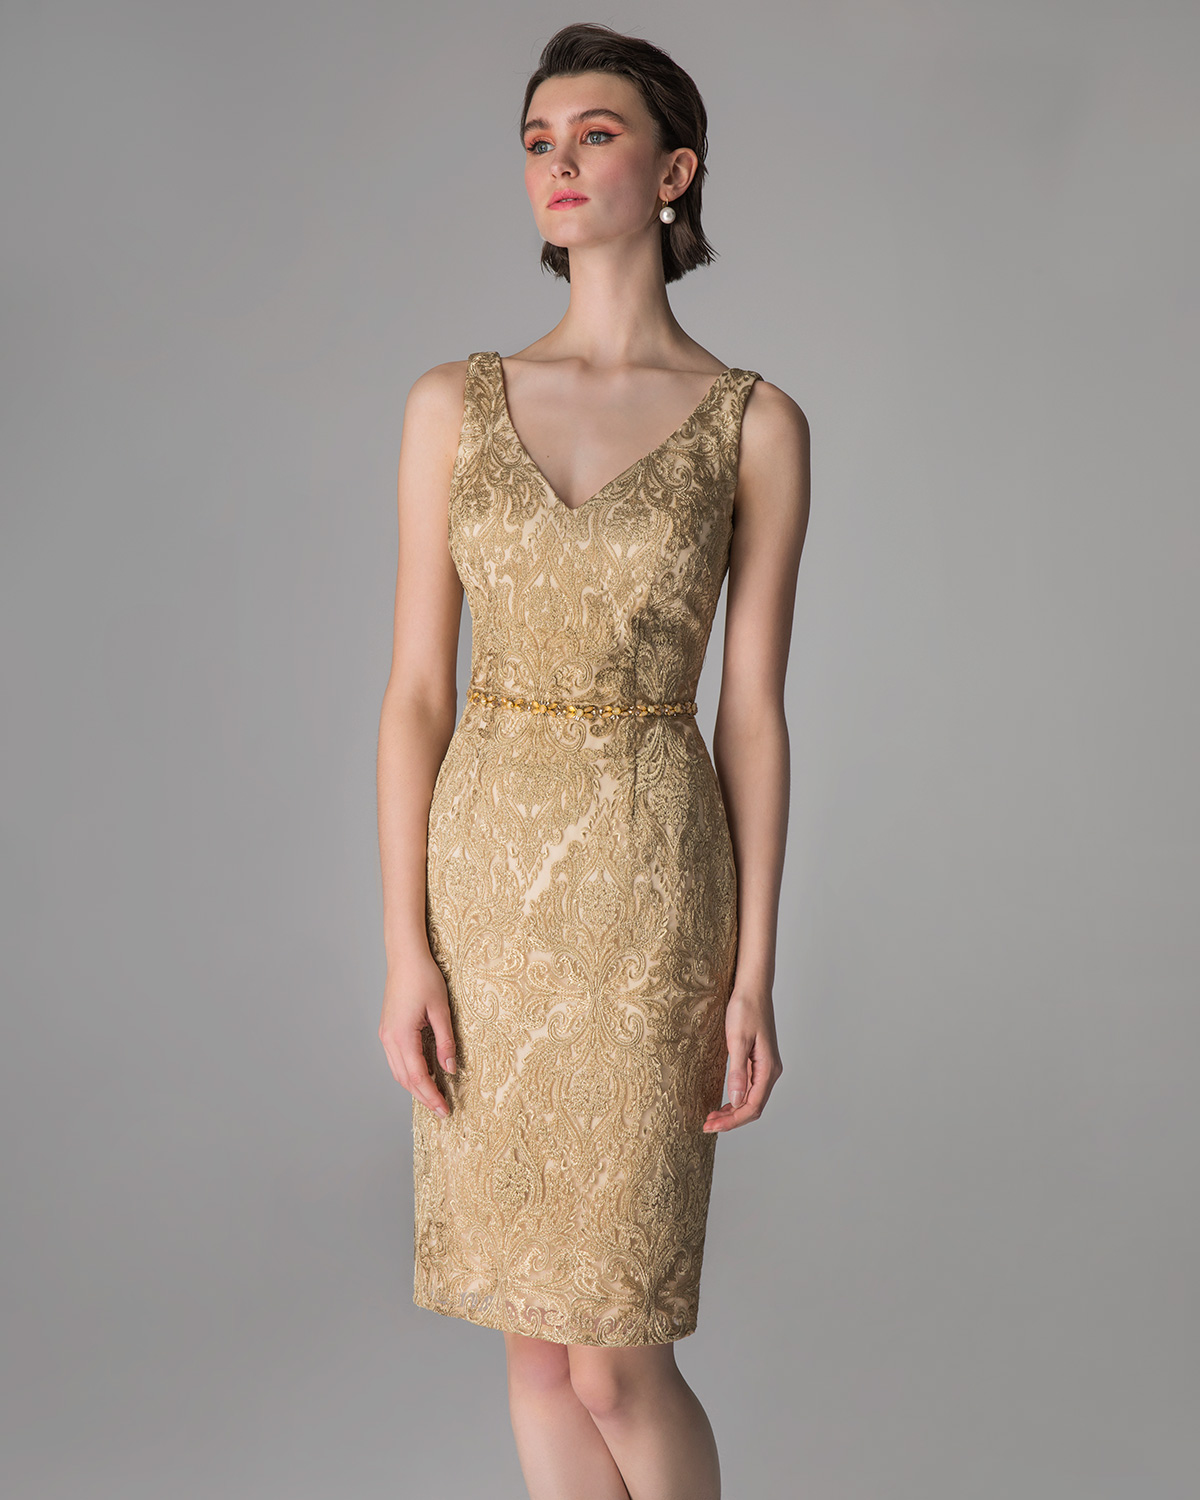 Short lace dress for mother of the bride  with beading around the waist